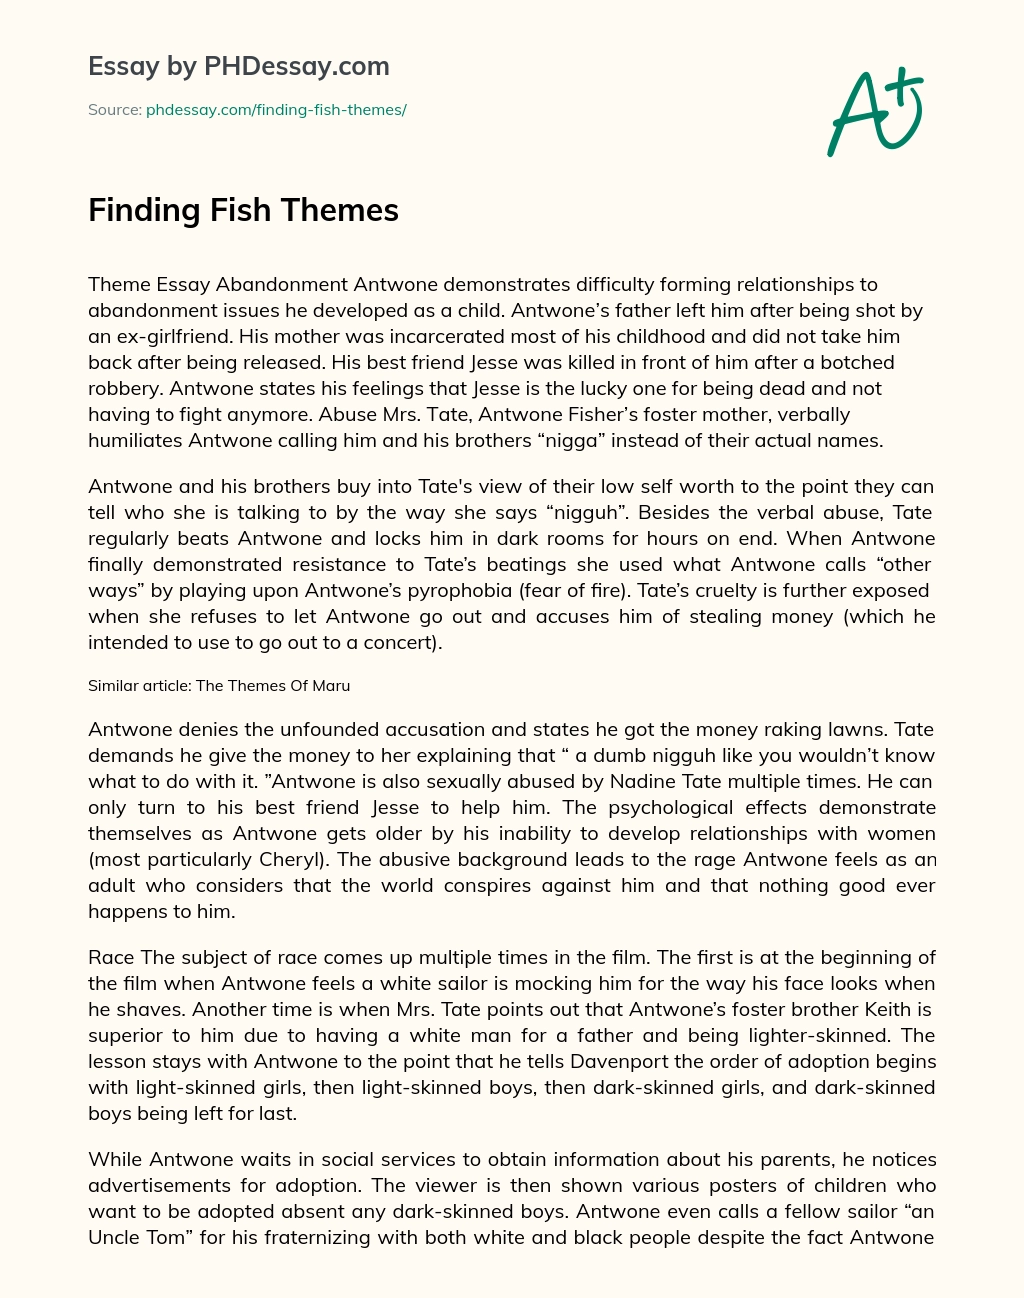 Finding Fish Themes essay